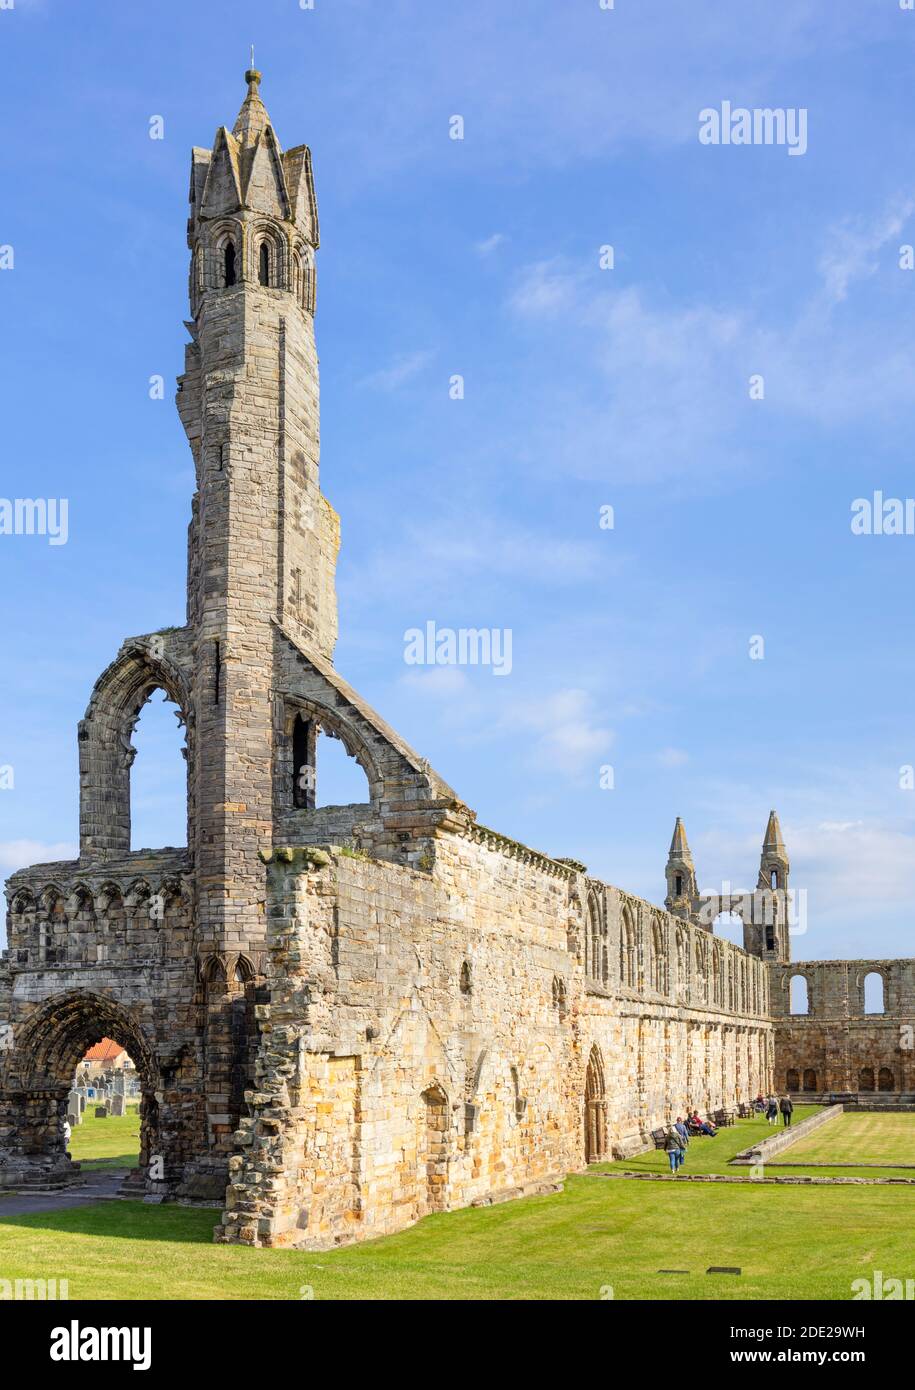 St. Andrews Schottland Ruinen der St. Andrews Cathedral St Rule's Tower Royal Burgh of St Andrews Fife Scotland UK GB Europe Stockfoto